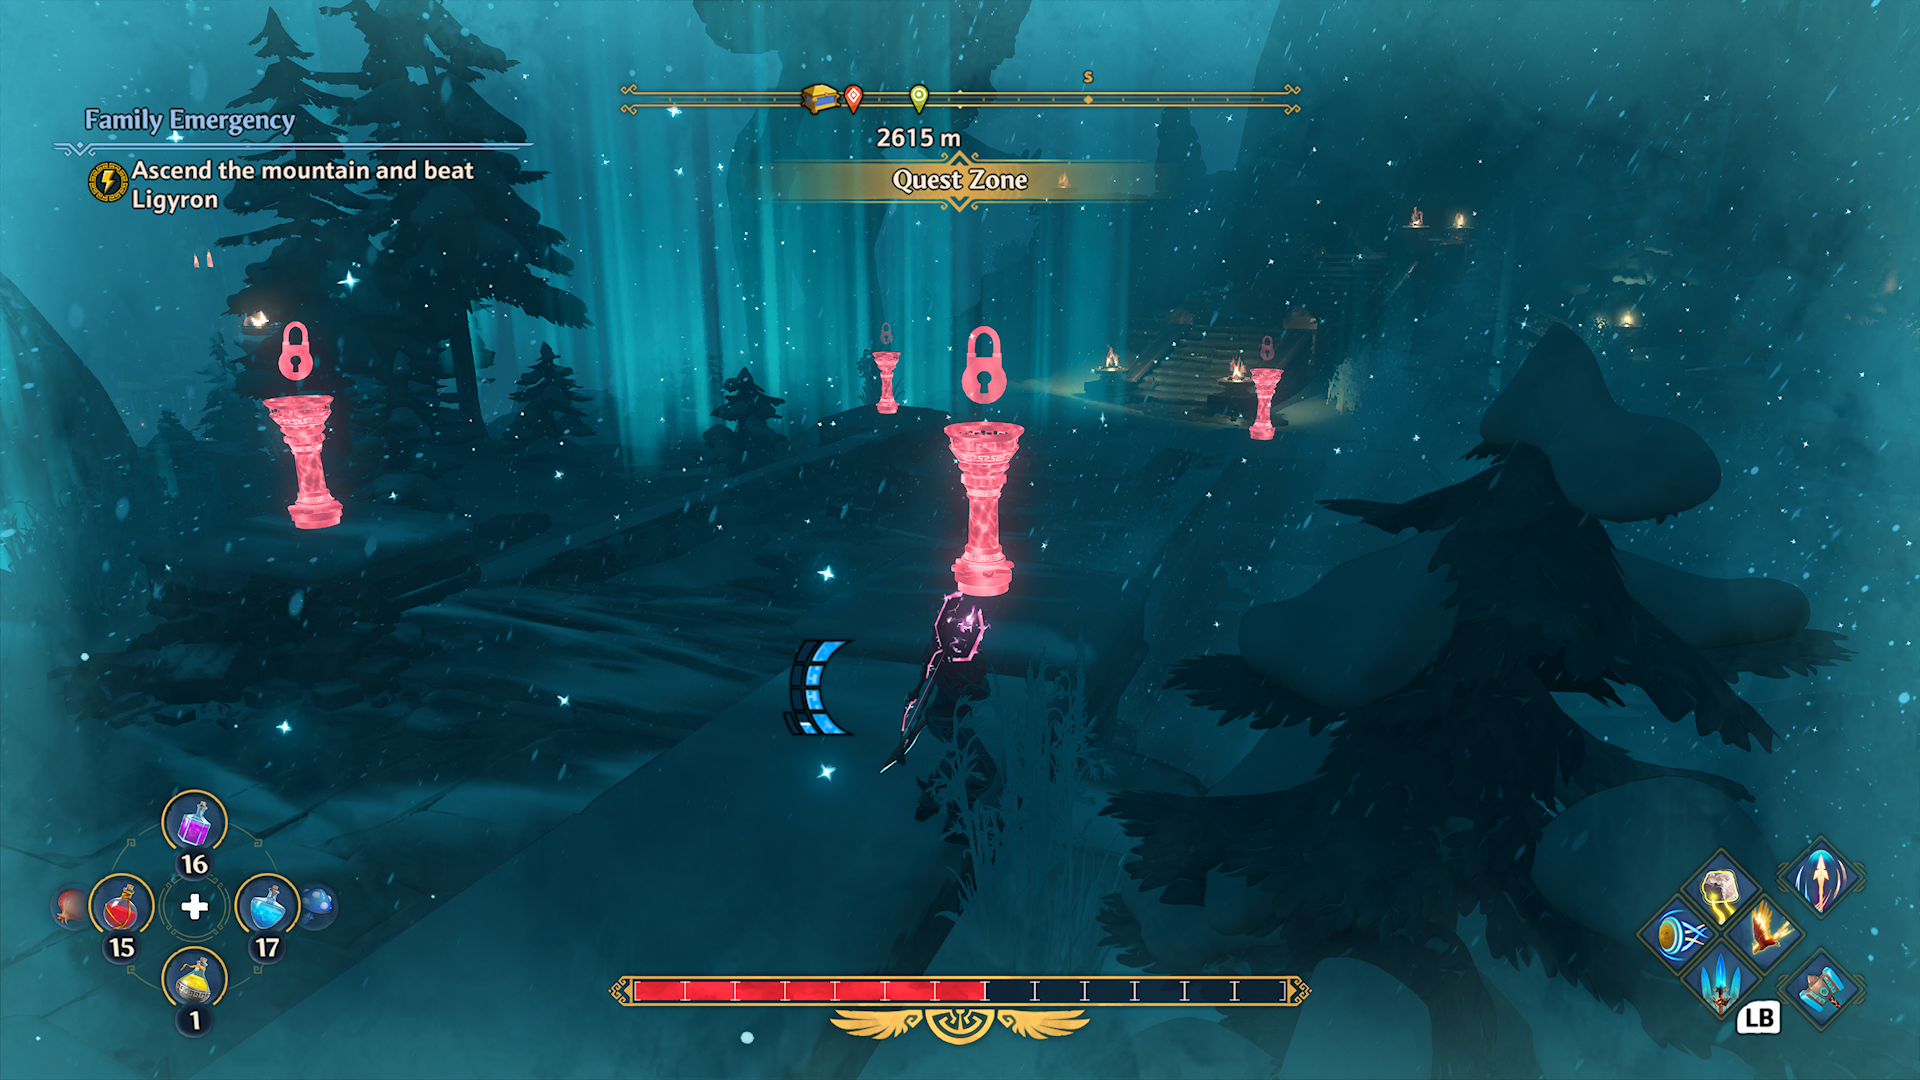 Fenyx Immortals Rising screenshot showing 4 bright red see-through torches each with a bright red lock icon above them. The red torches contrast well with the surrounding dark blues in a dimly lit snow covered landscape.